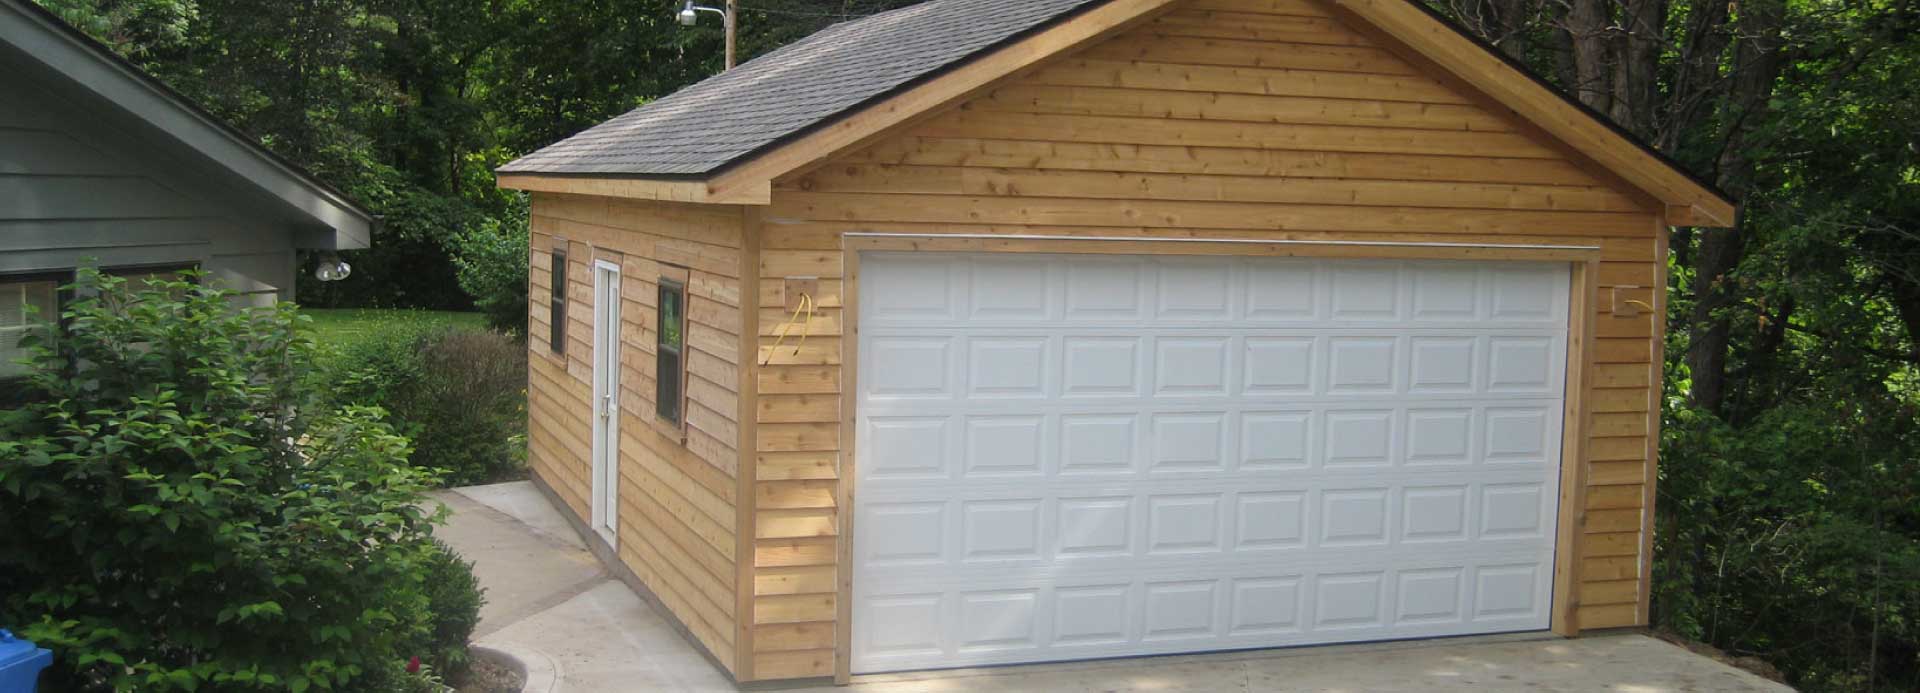 Garages And Pole Barns